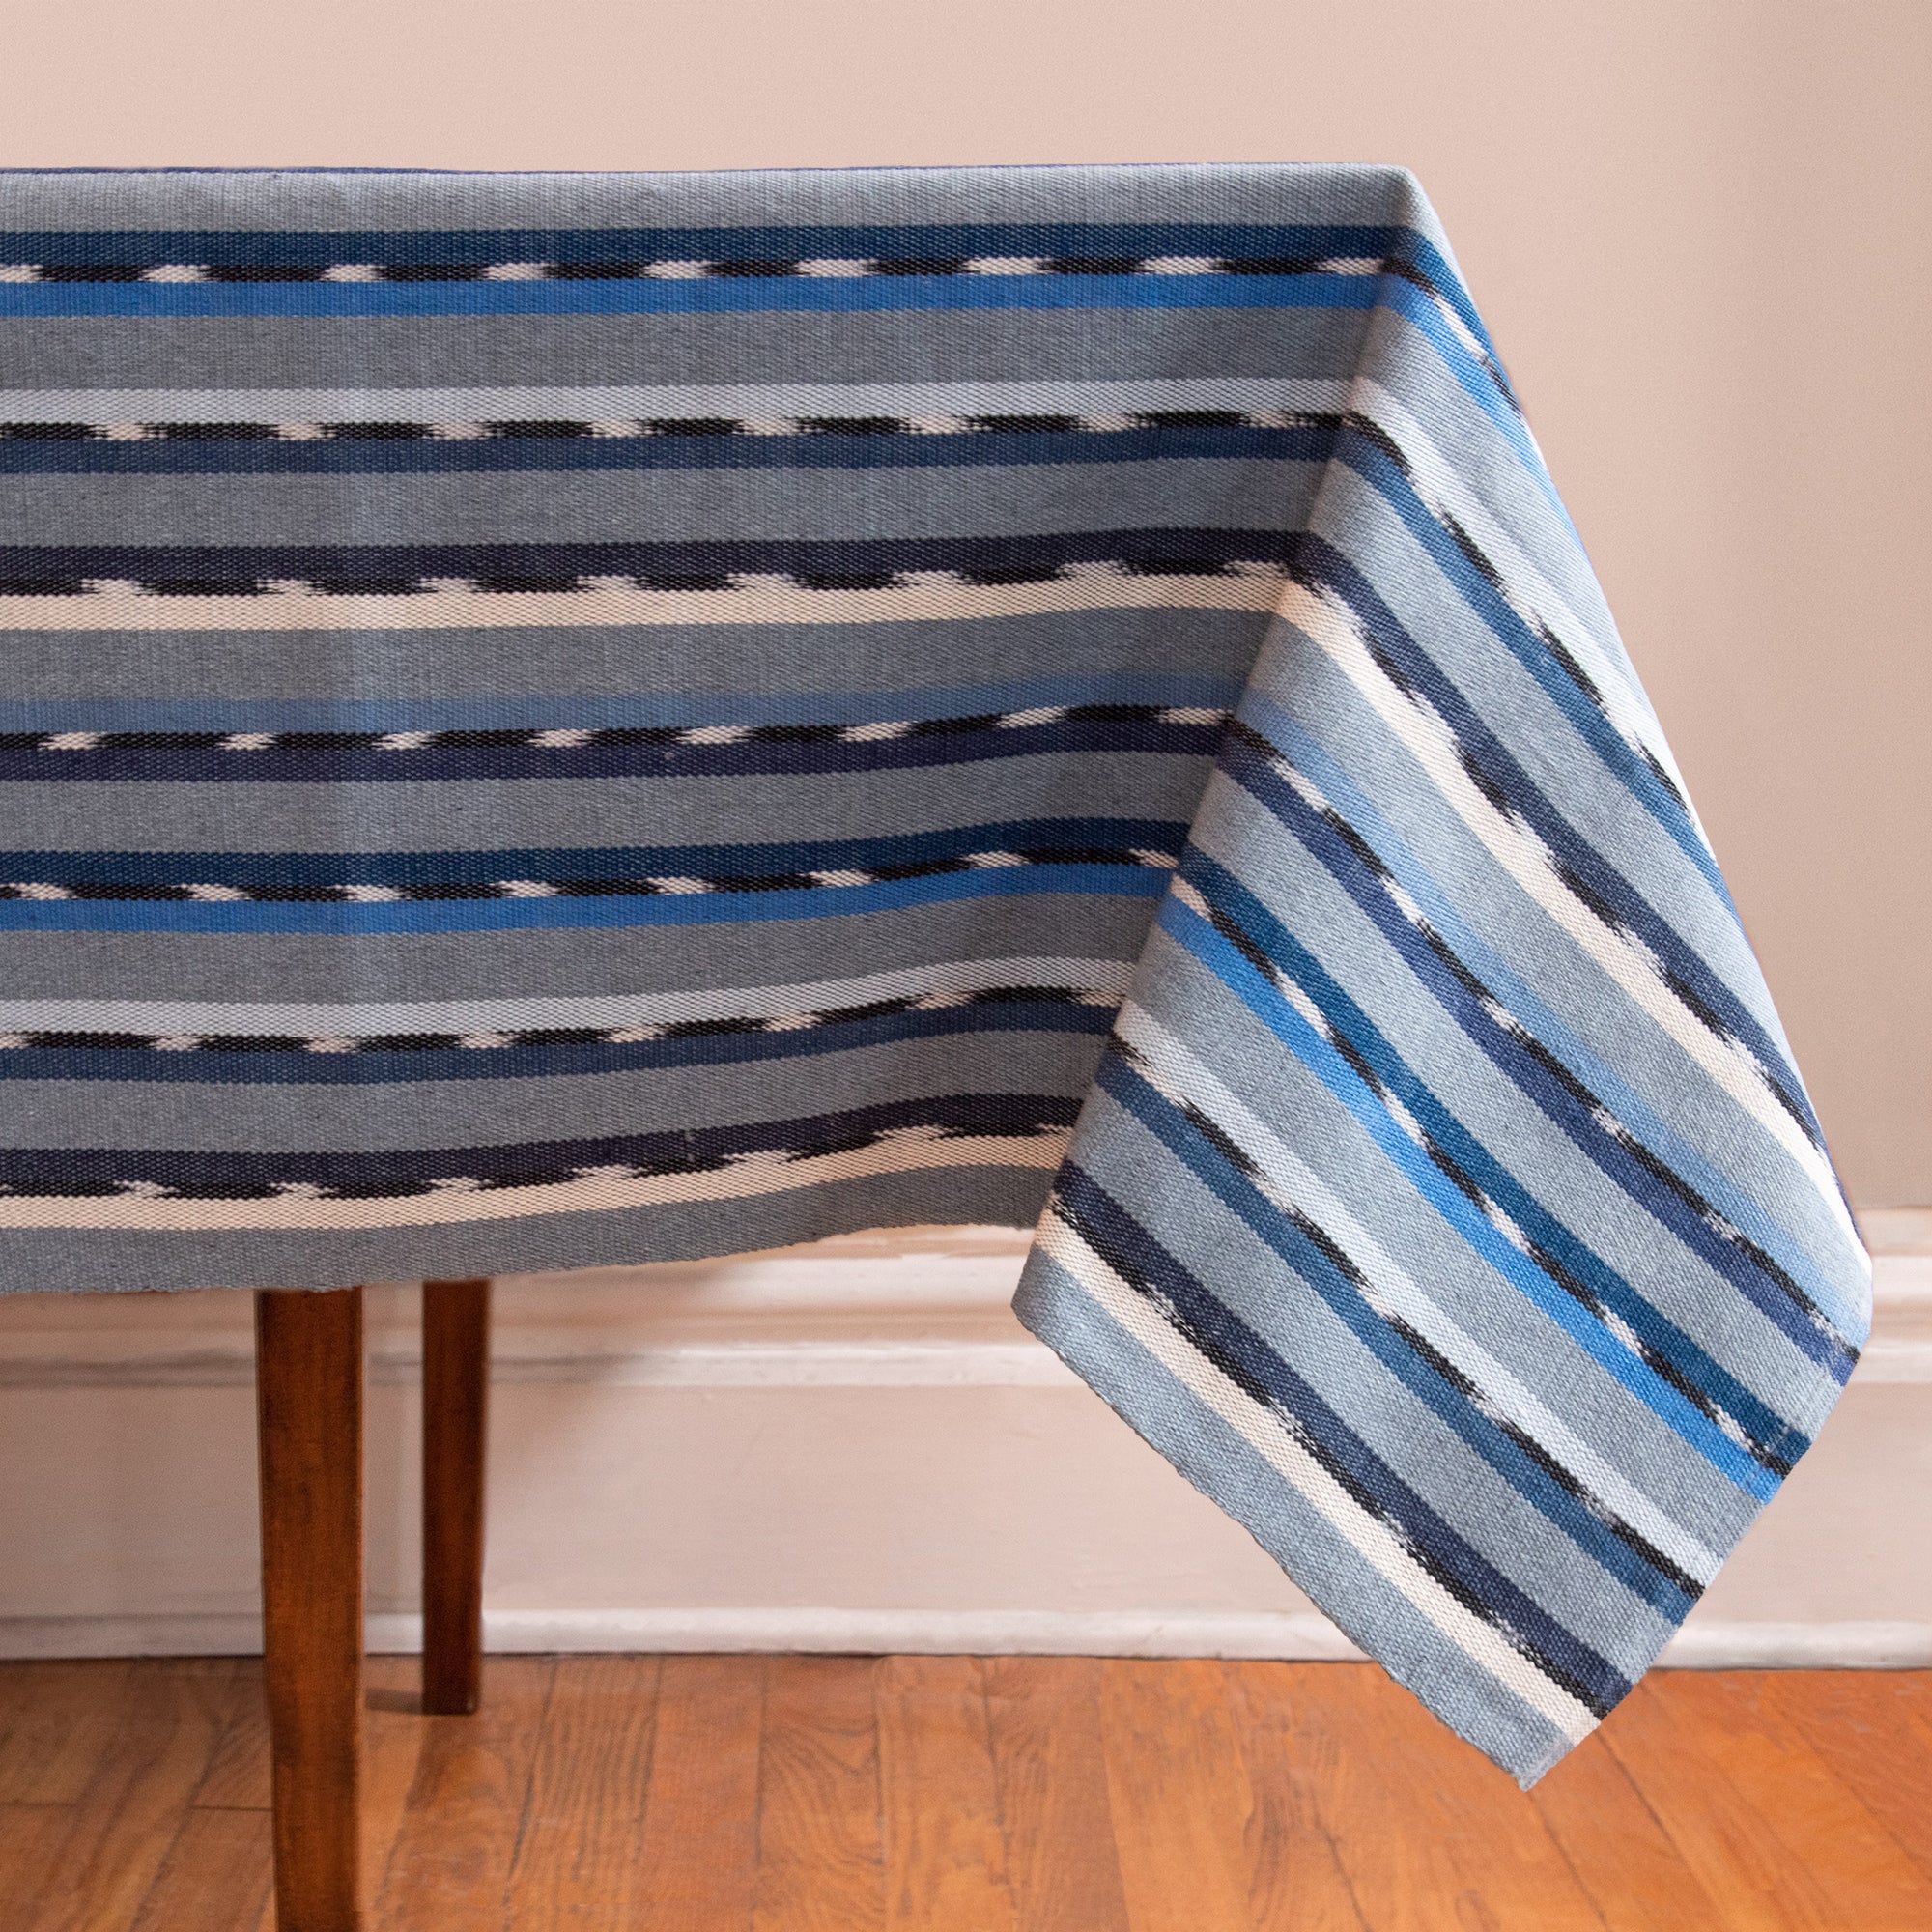 Striped Handwoven tablecloth in blues